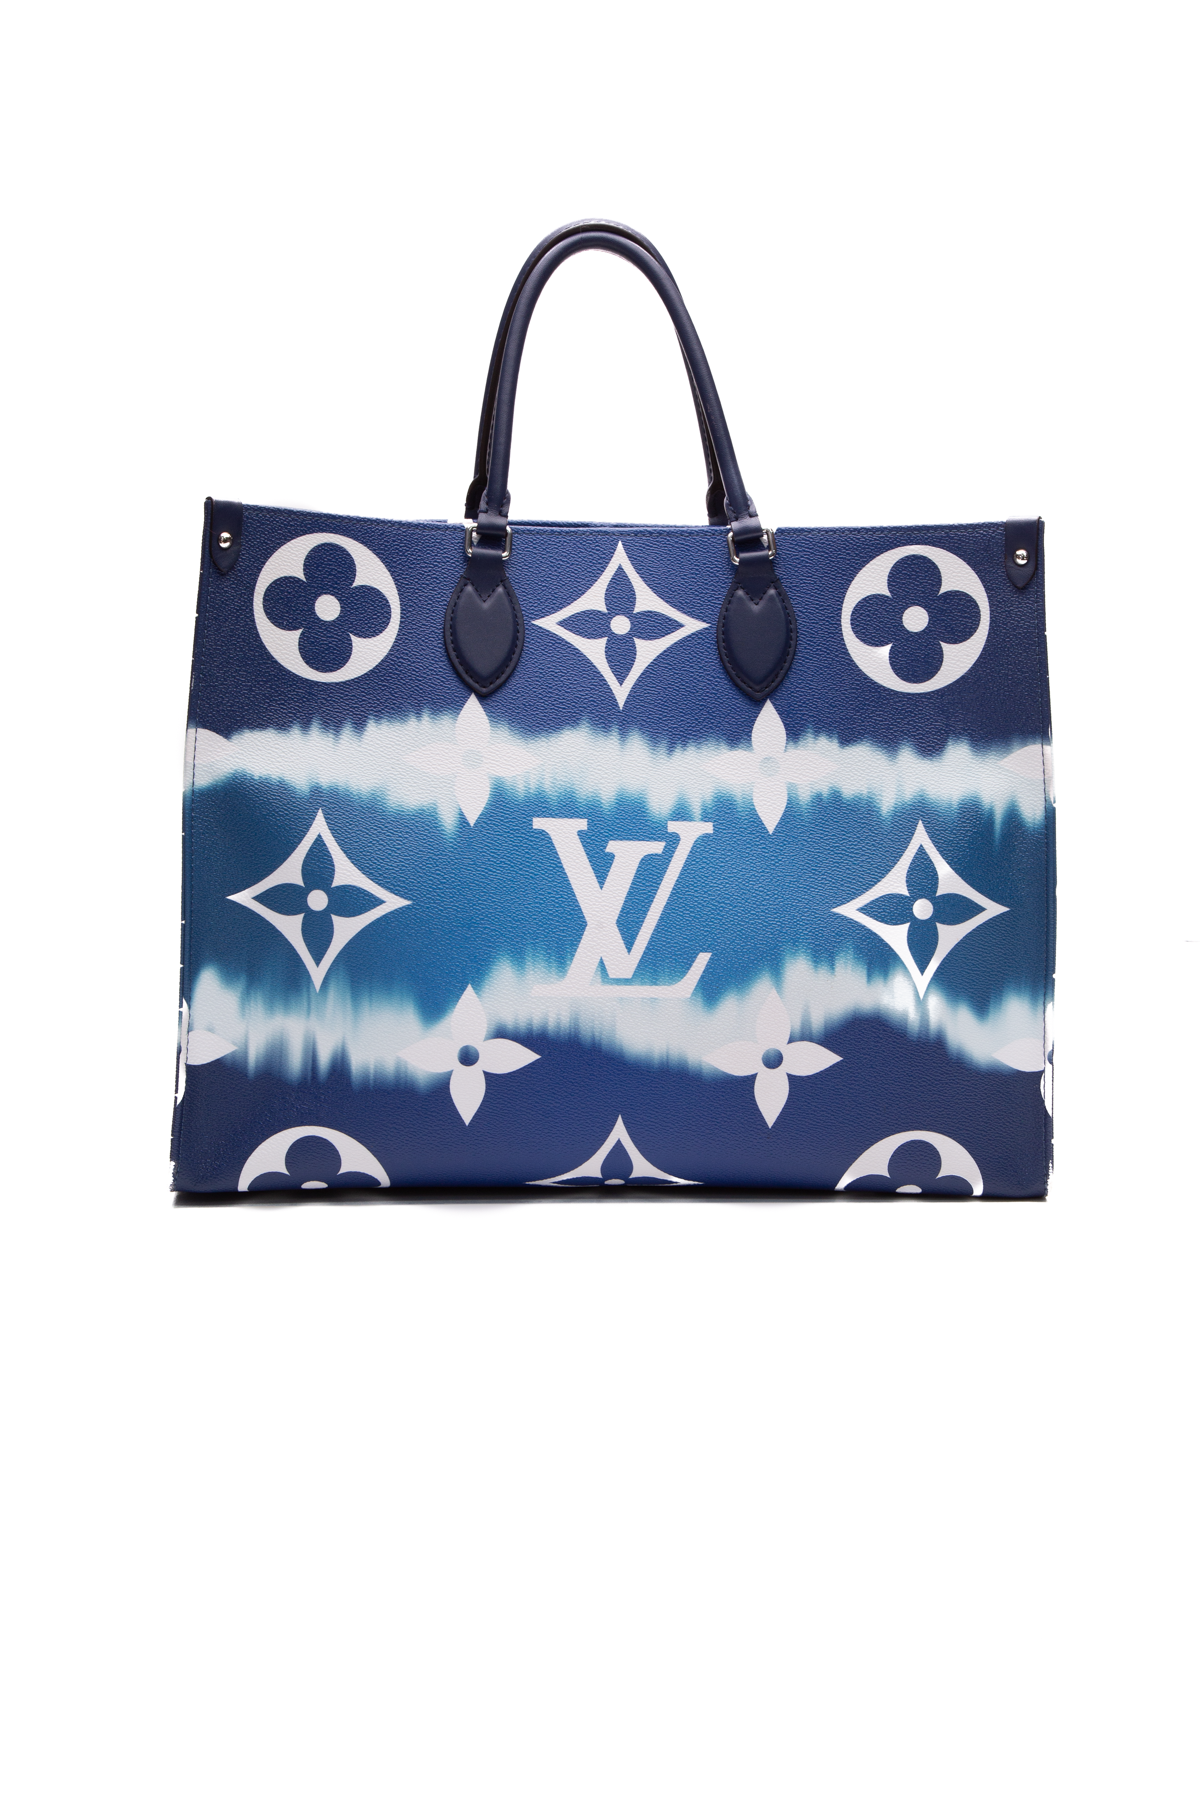 Louis Vuitton HAMPTONS By The Pool Neverfull GM Tote Bag Blue | Receipt